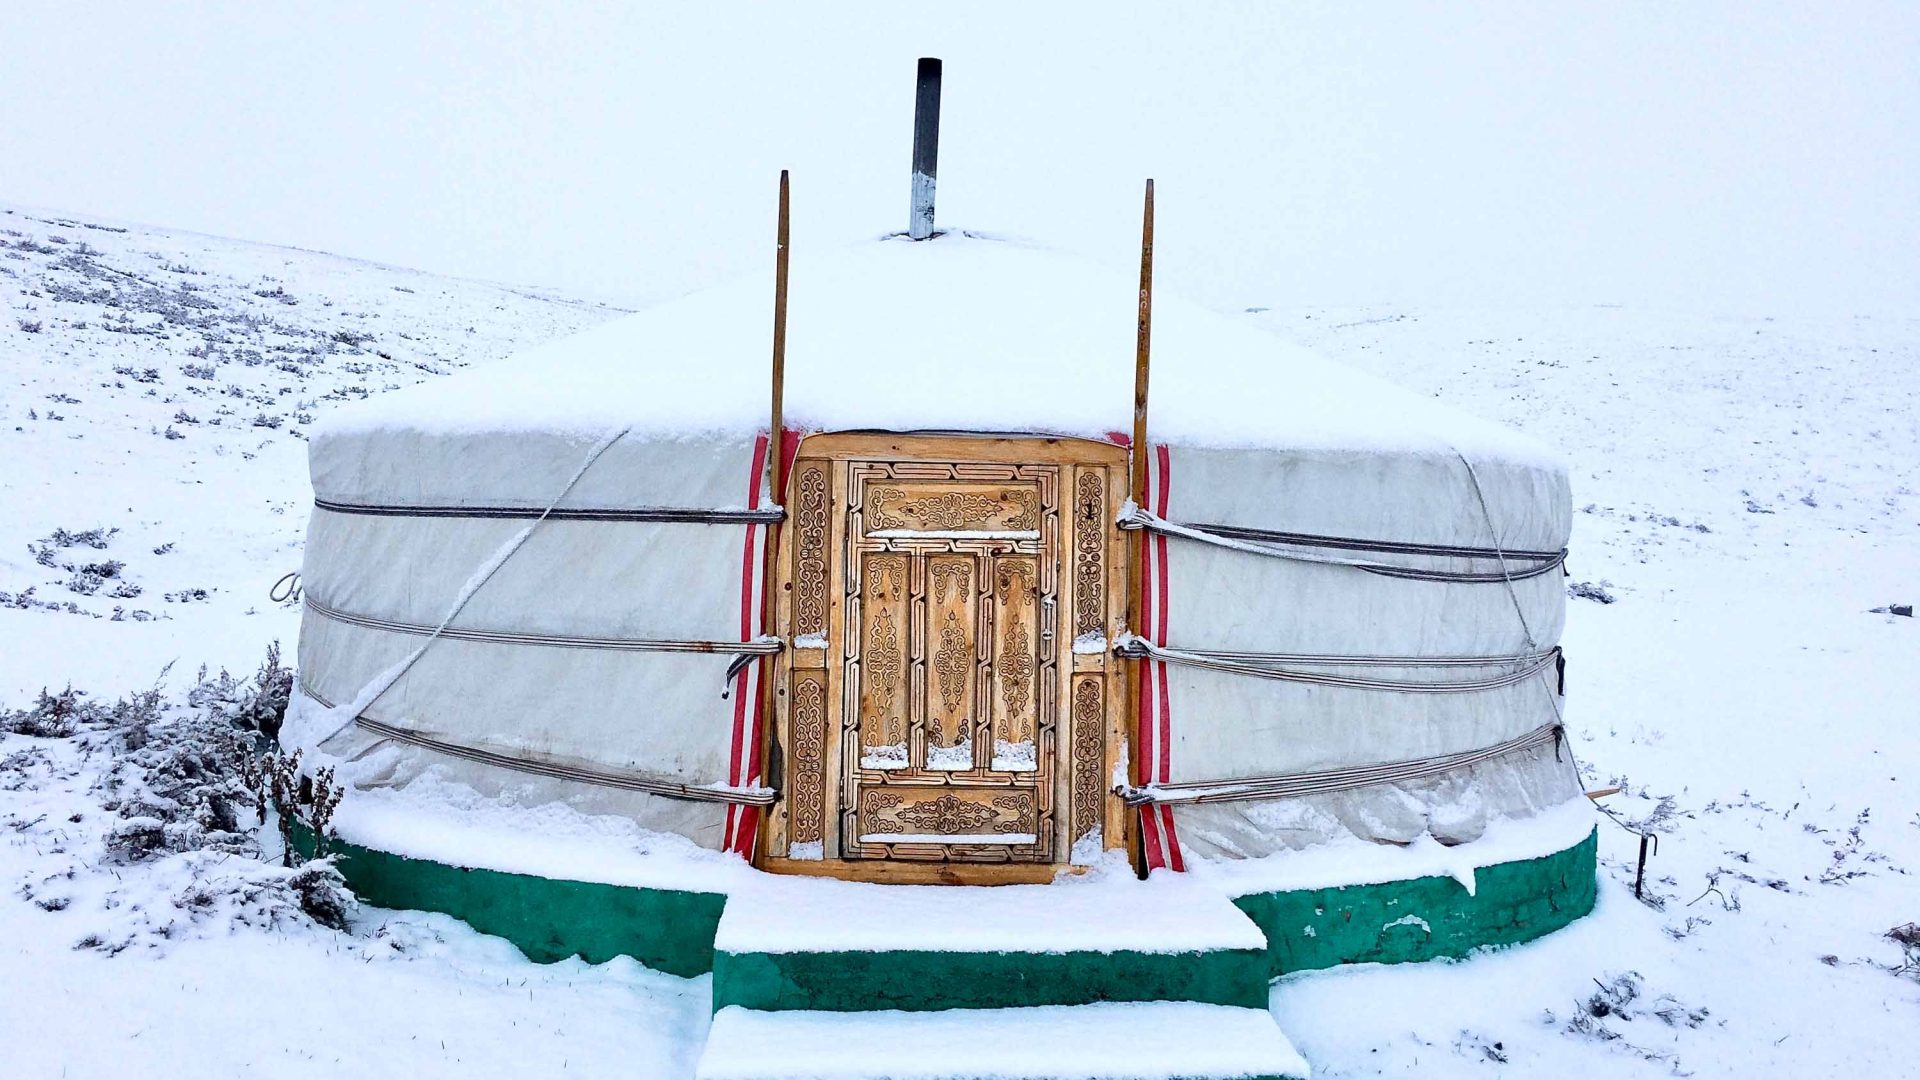 A Mongolian yurt in the snow.